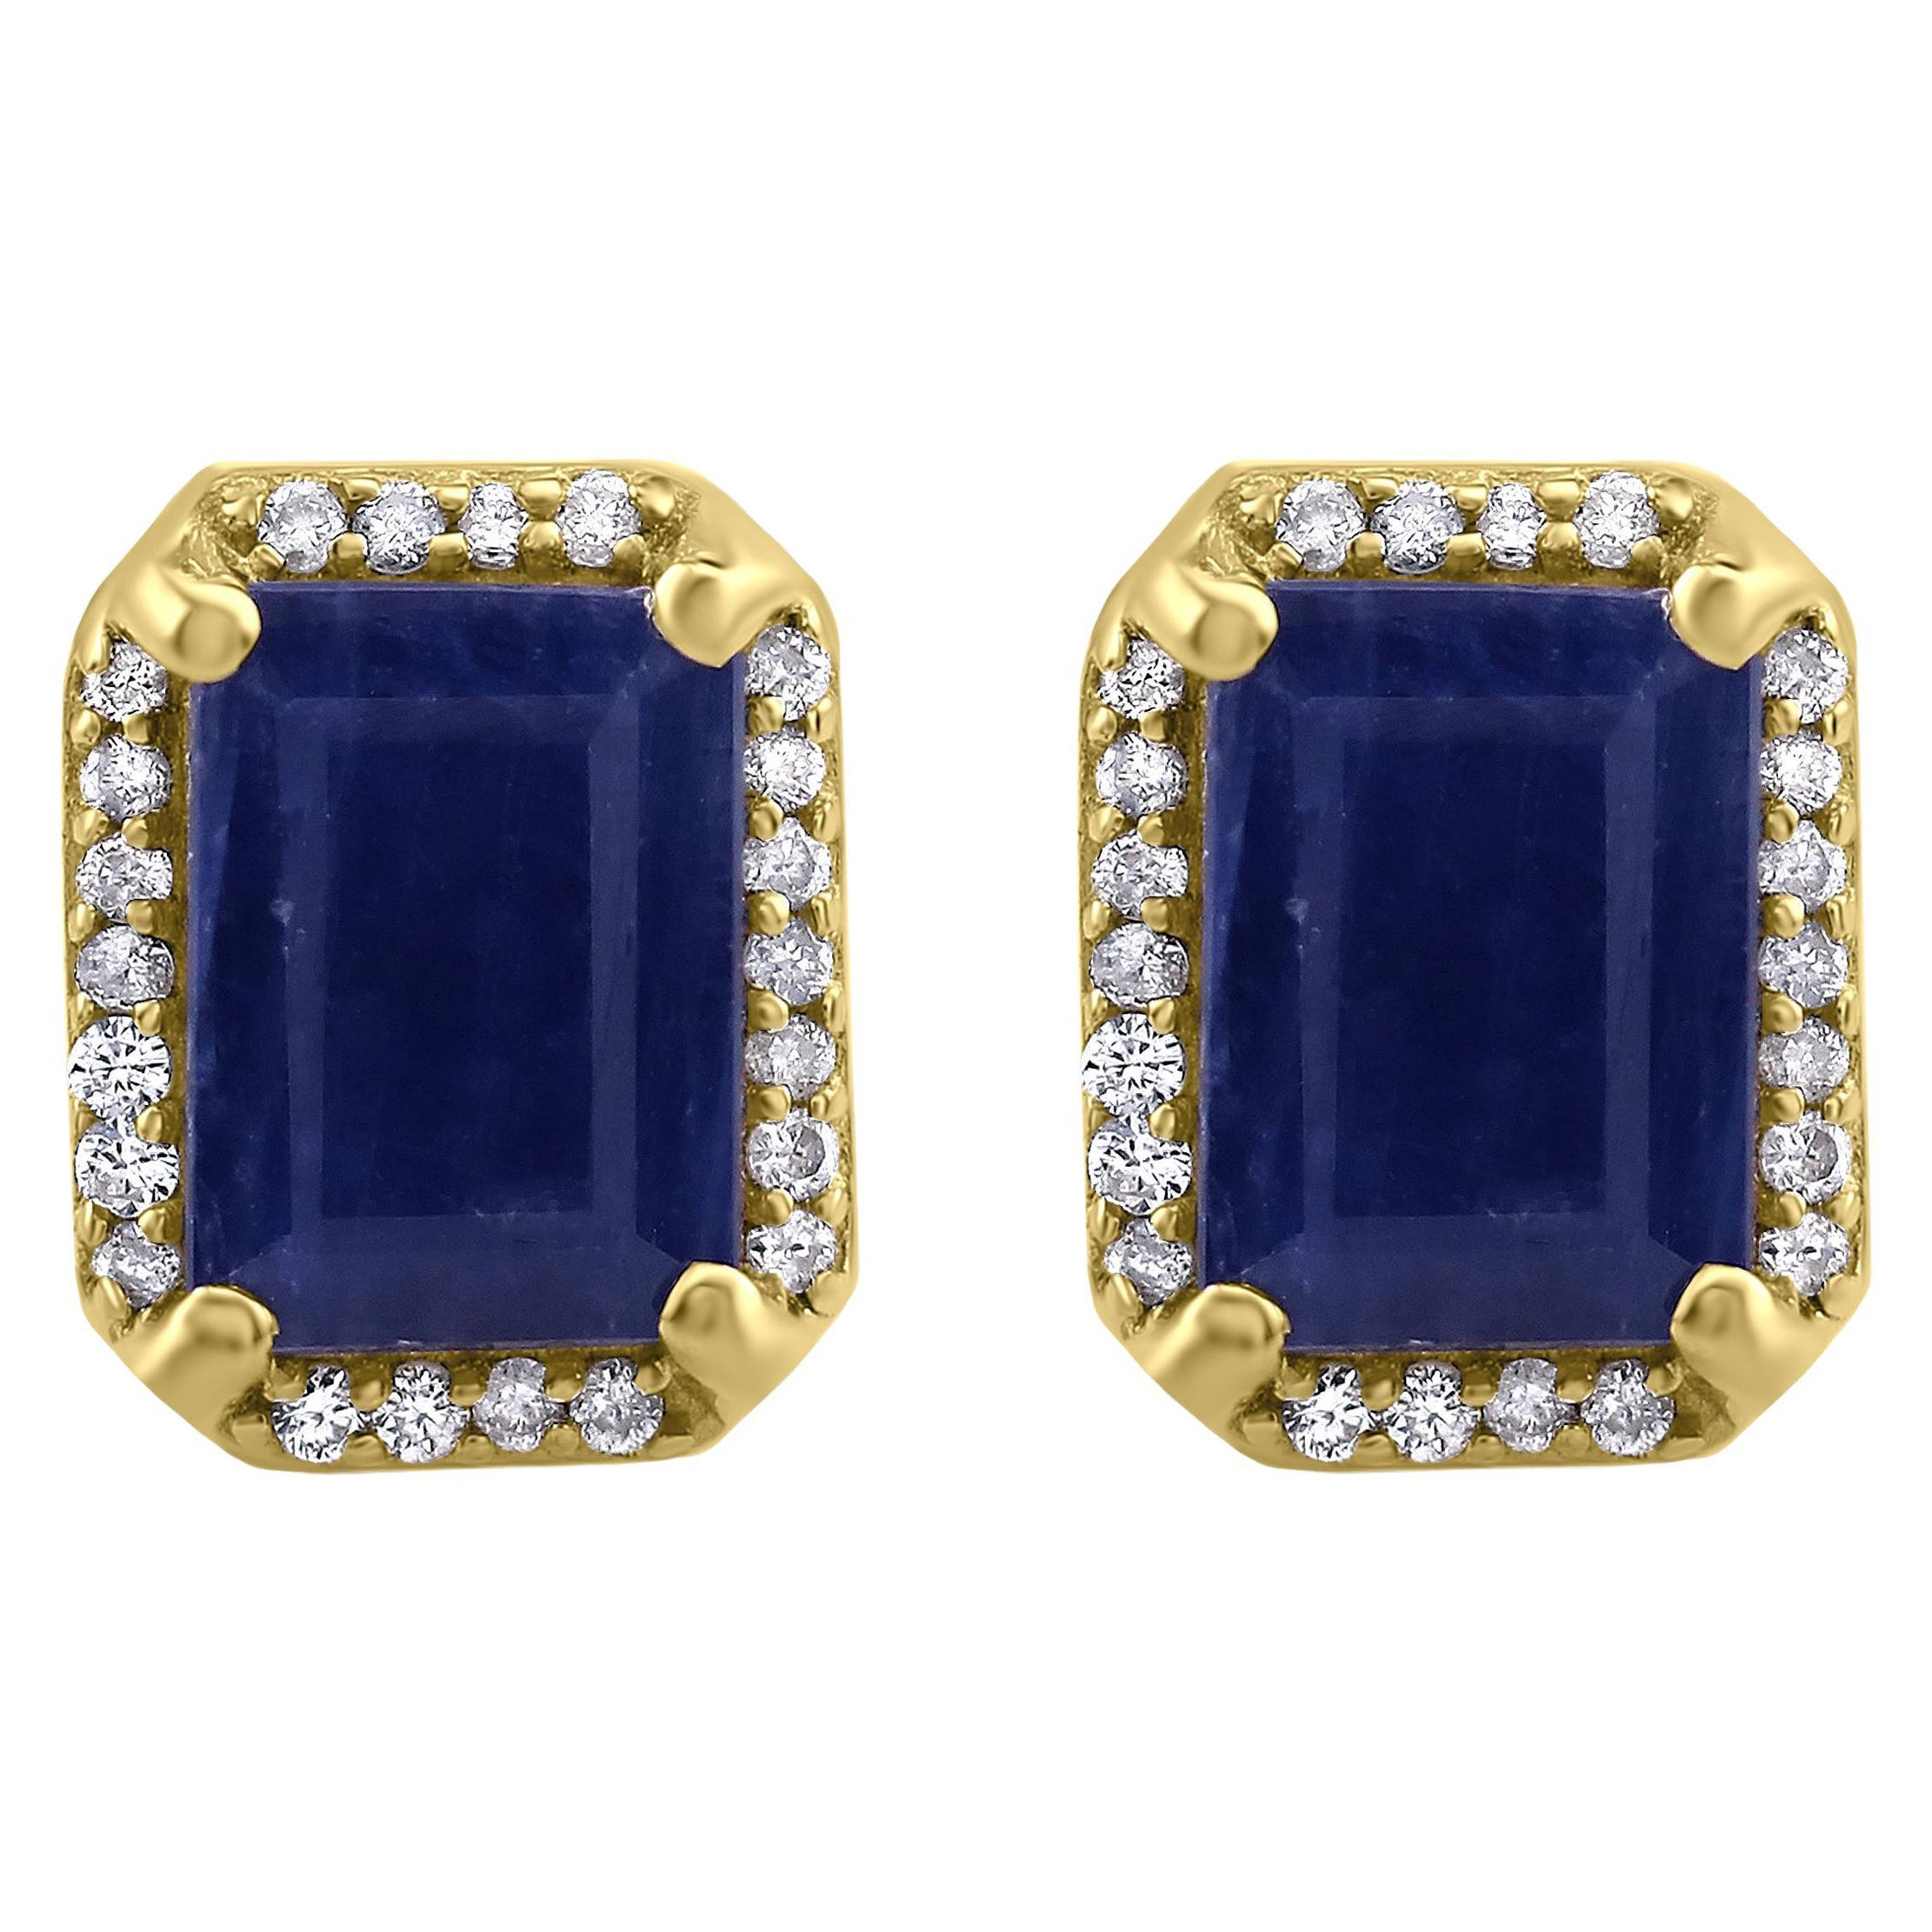 Gemistry 2.9 Carat Octagon Blue Sapphire Stud Earrings with Diamond in 14K Gold For Sale